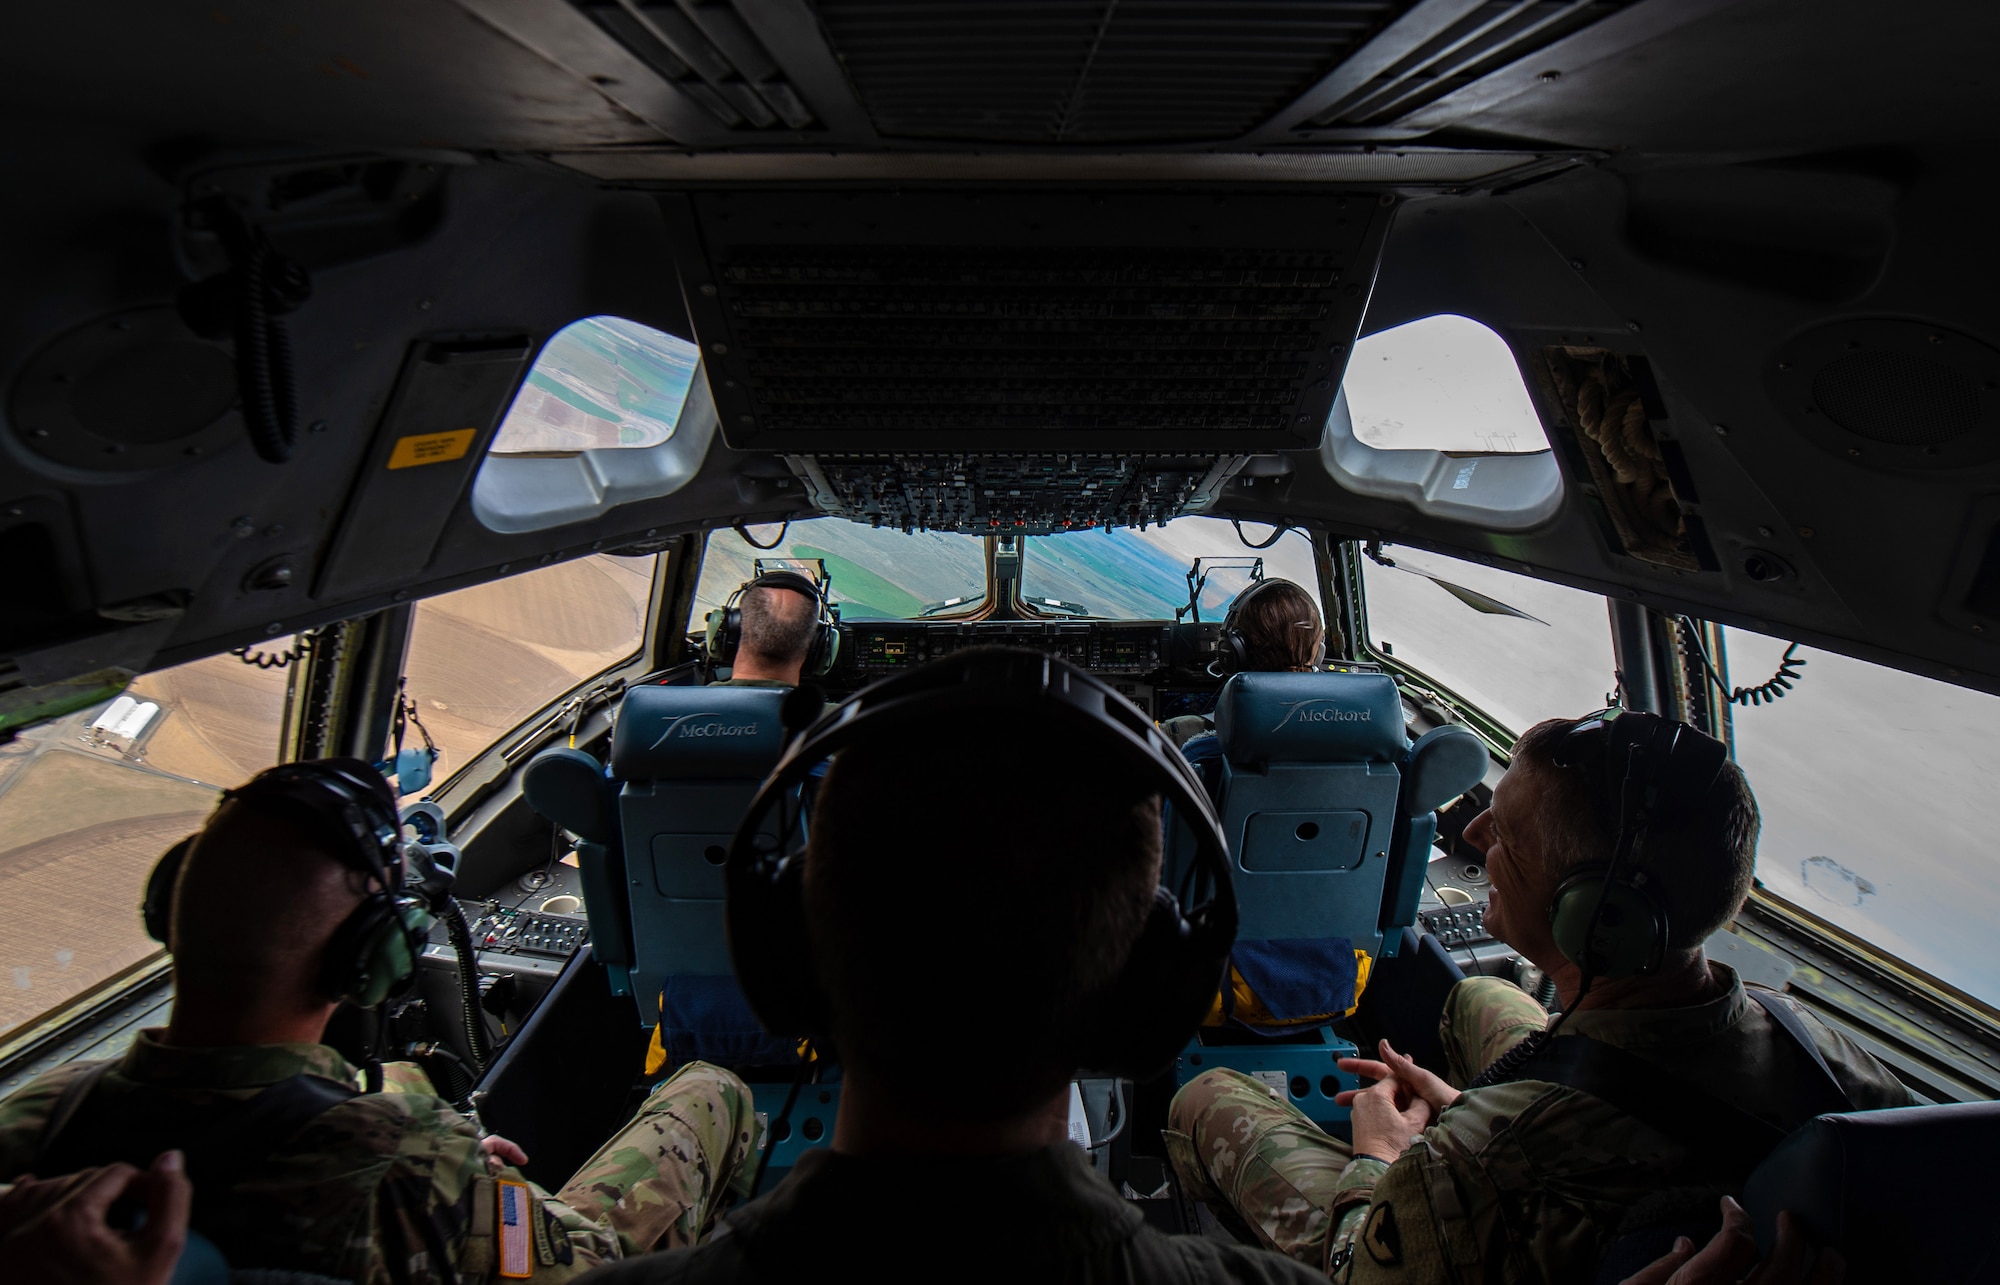 From back right, U.S. Army Col. Skye Duncan, Joint Base Lewis-McChord (JBLM) commander; U.S. Air Force Col. Scovill Currin, 62nd Airlift Wing commander; and U.S. Army Command Sergeant Major Timothy Marble, JBLM command sergeant major, sit in the flight deck of a C-17 Globemaster III near Moses Lake Municipal Airport, Wash., Oct. 1, 2019. The purpose of the flight was to provide training opportunities for Airmen and Soldiers in a mobility movement exercise. (U.S. Air Force photo by Senior Airman Tryphena Mayhugh)